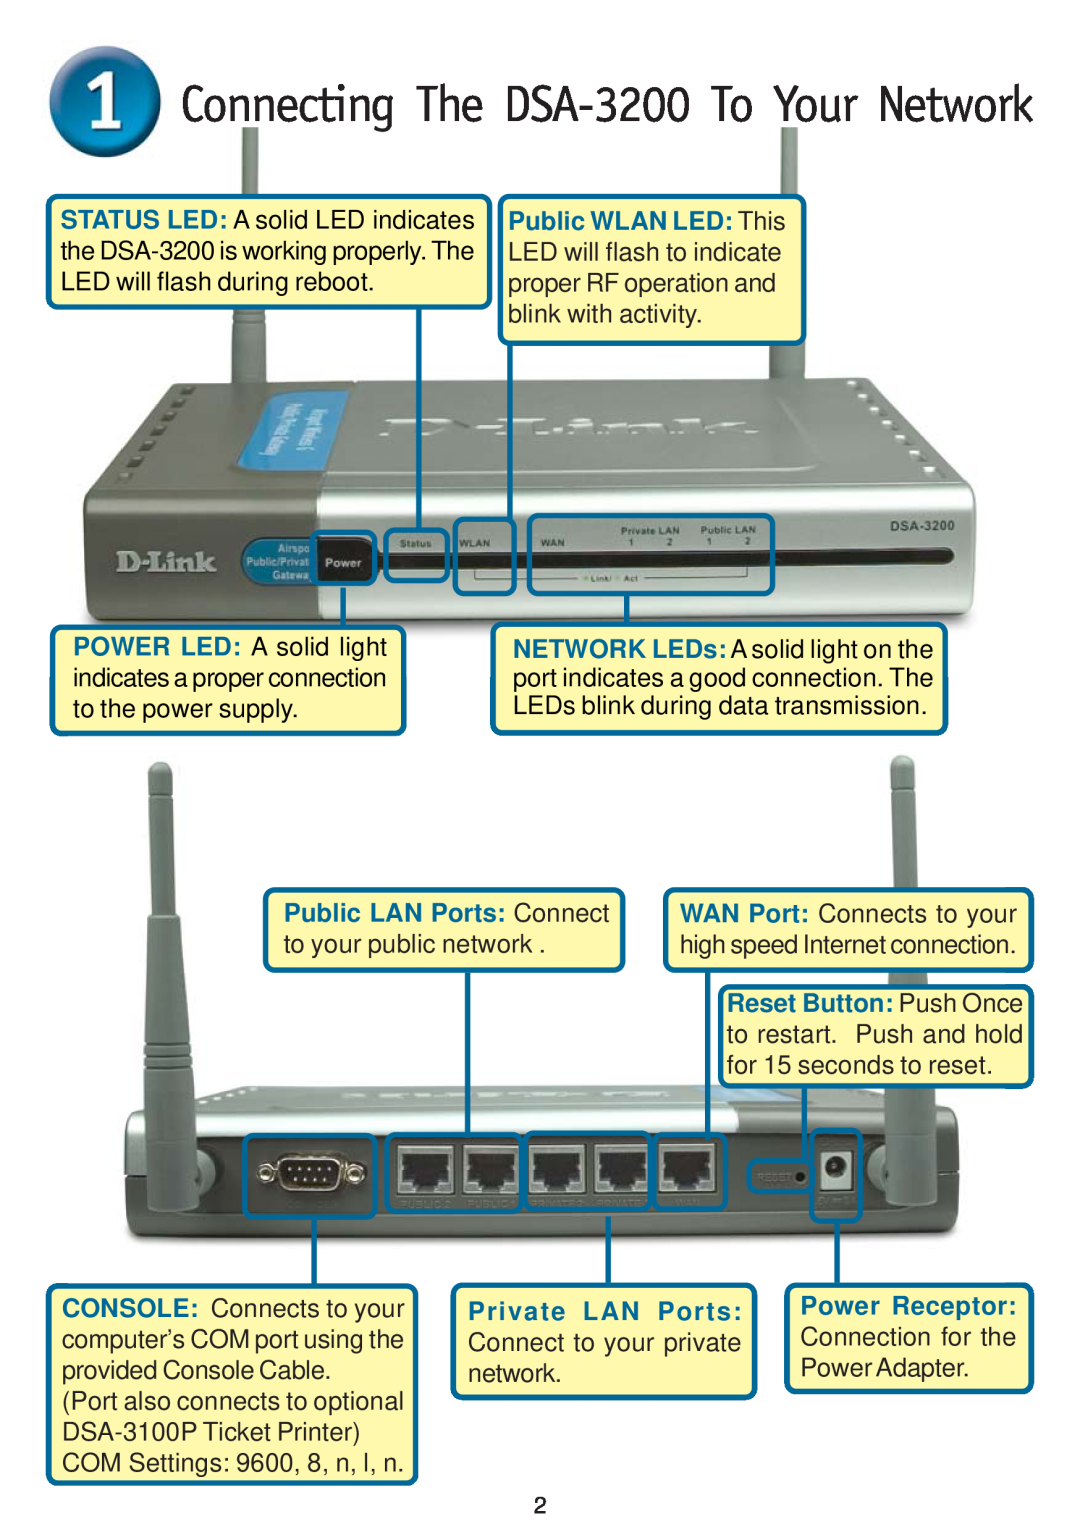 D-Link Connecting The DSA-3200 To Your Network, Public LAN Ports Connect, Reset Button Push Once, Private LAN Ports 